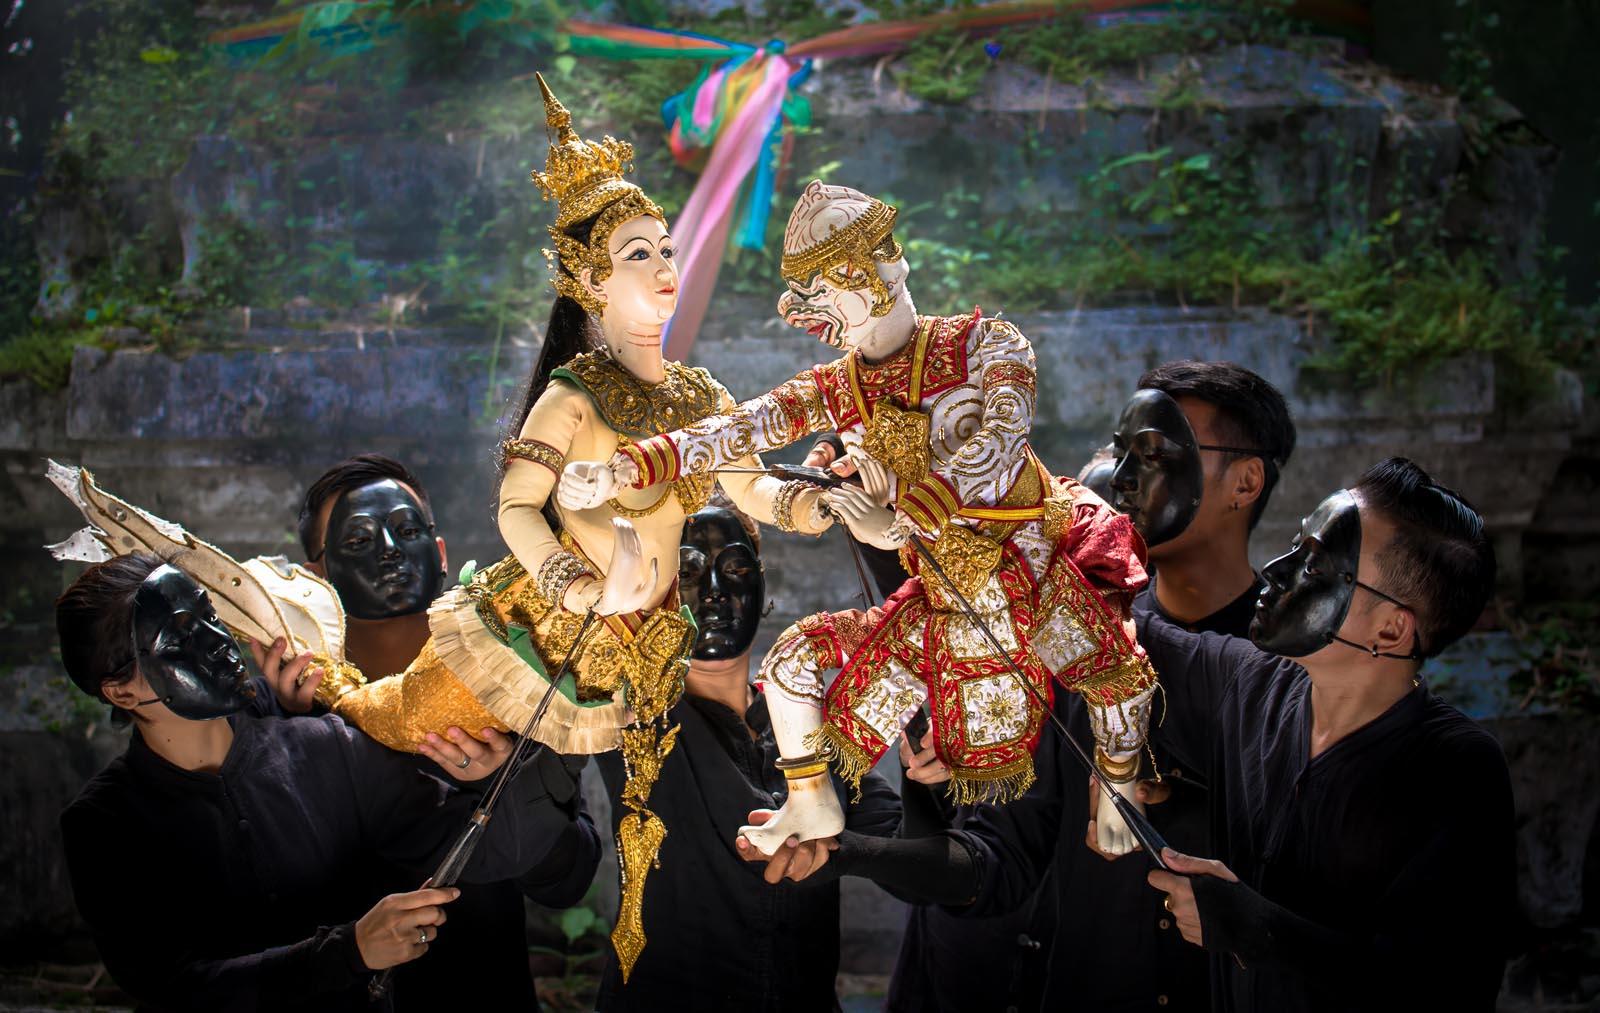 Enjoy traditional puppet show related to Thai culture